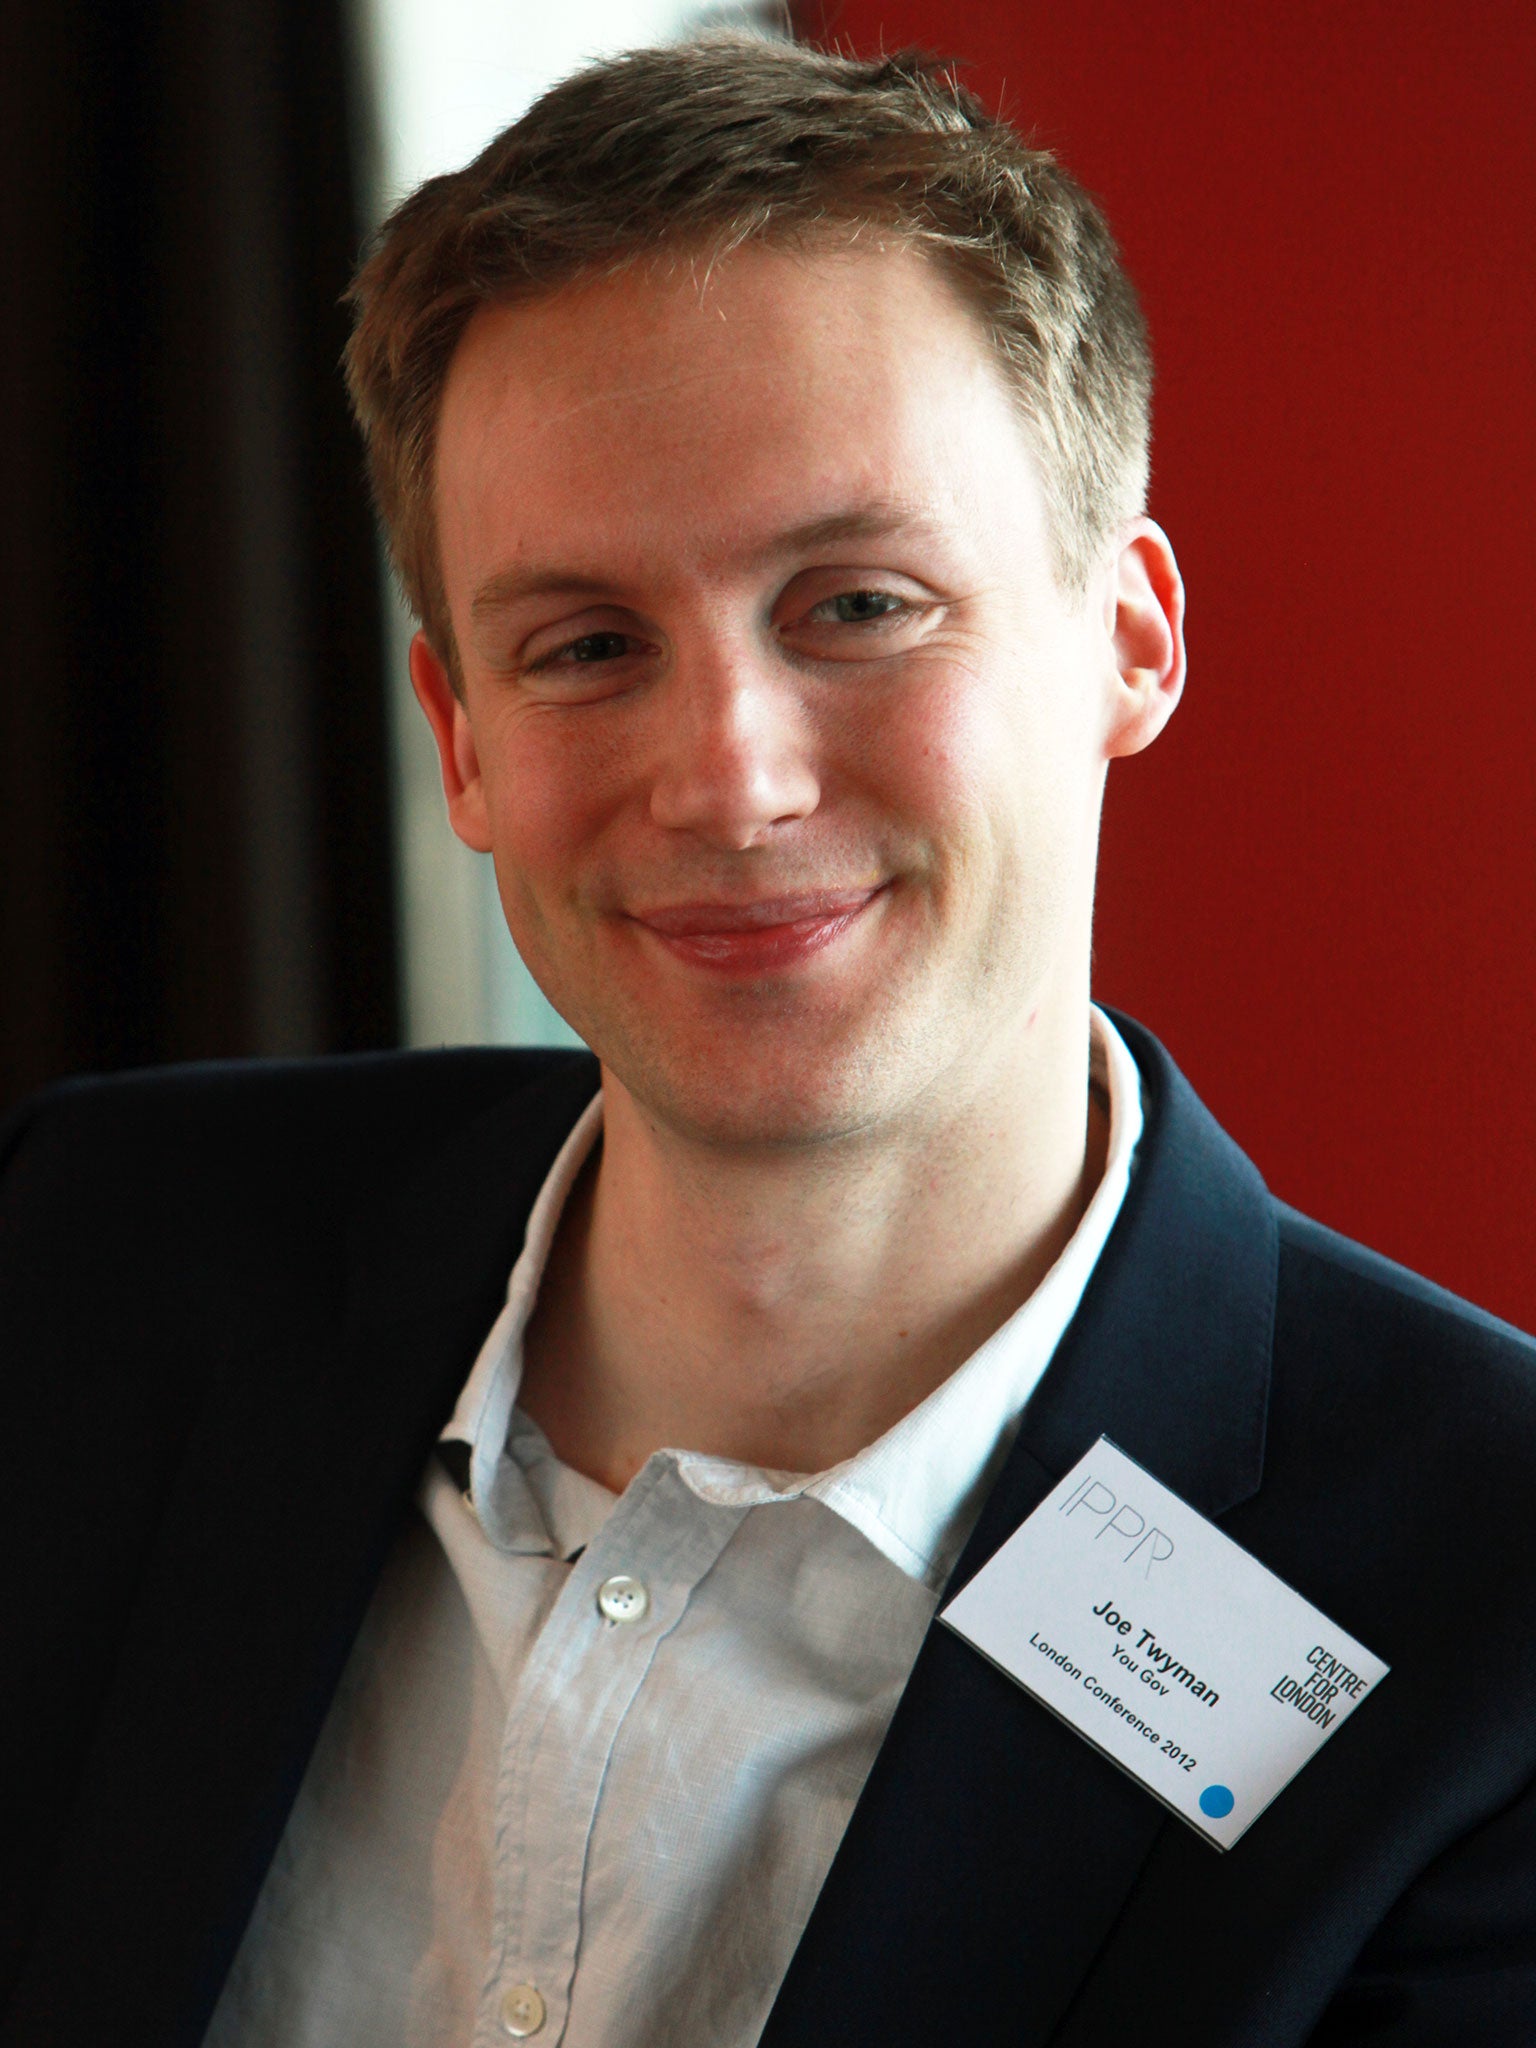 Joe Twyman is head of political and social research at YouGov